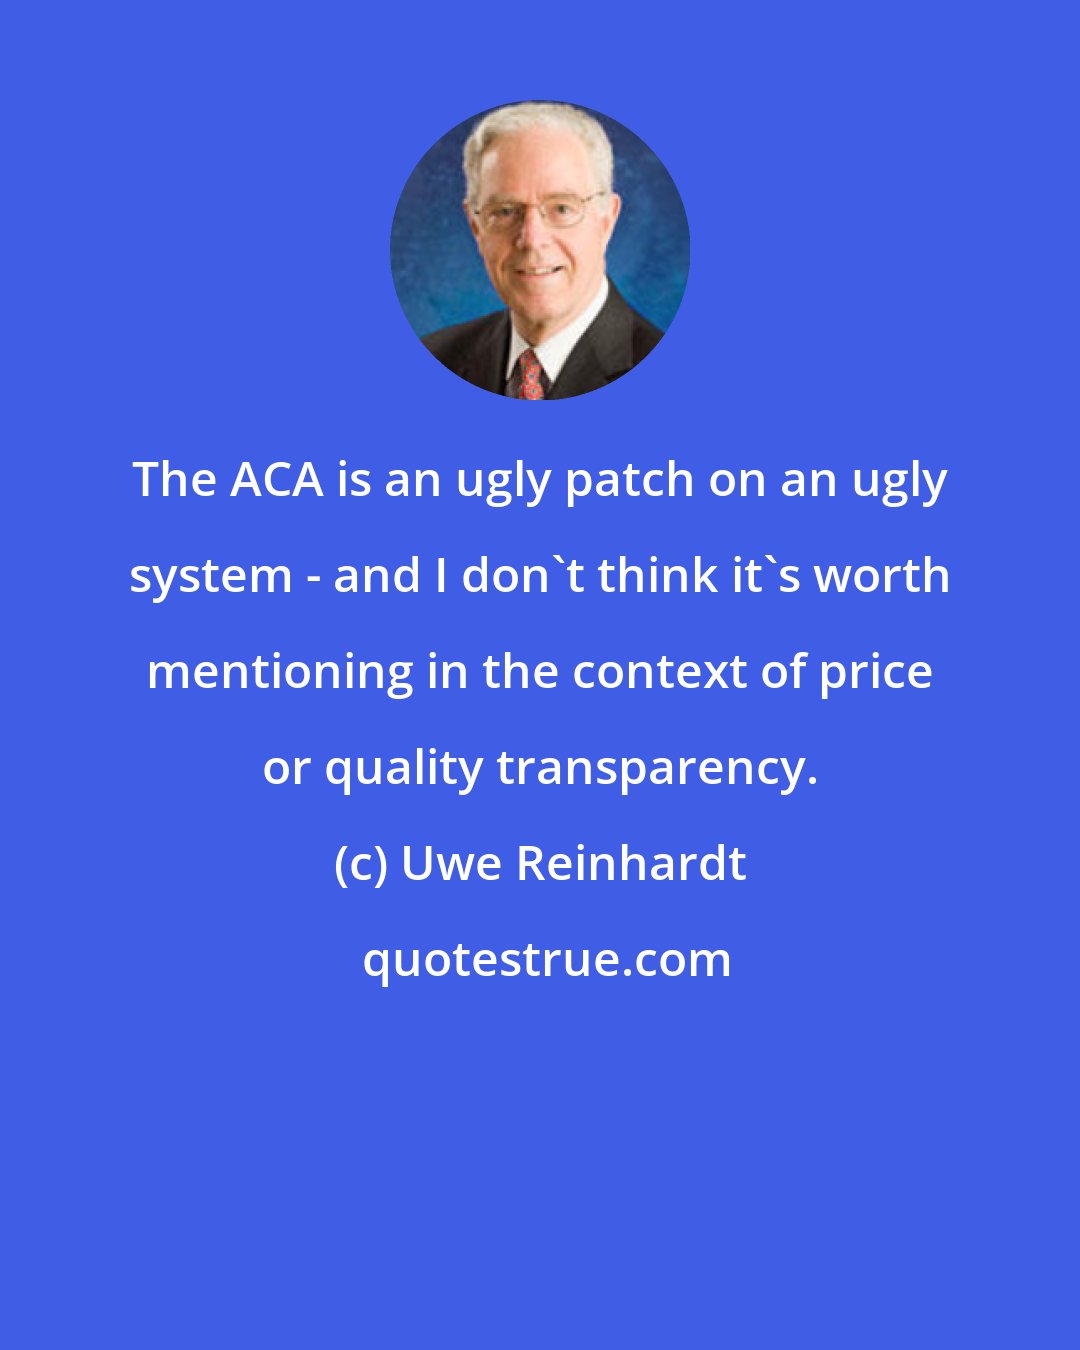 Uwe Reinhardt: The ACA is an ugly patch on an ugly system - and I don't think it's worth mentioning in the context of price or quality transparency.